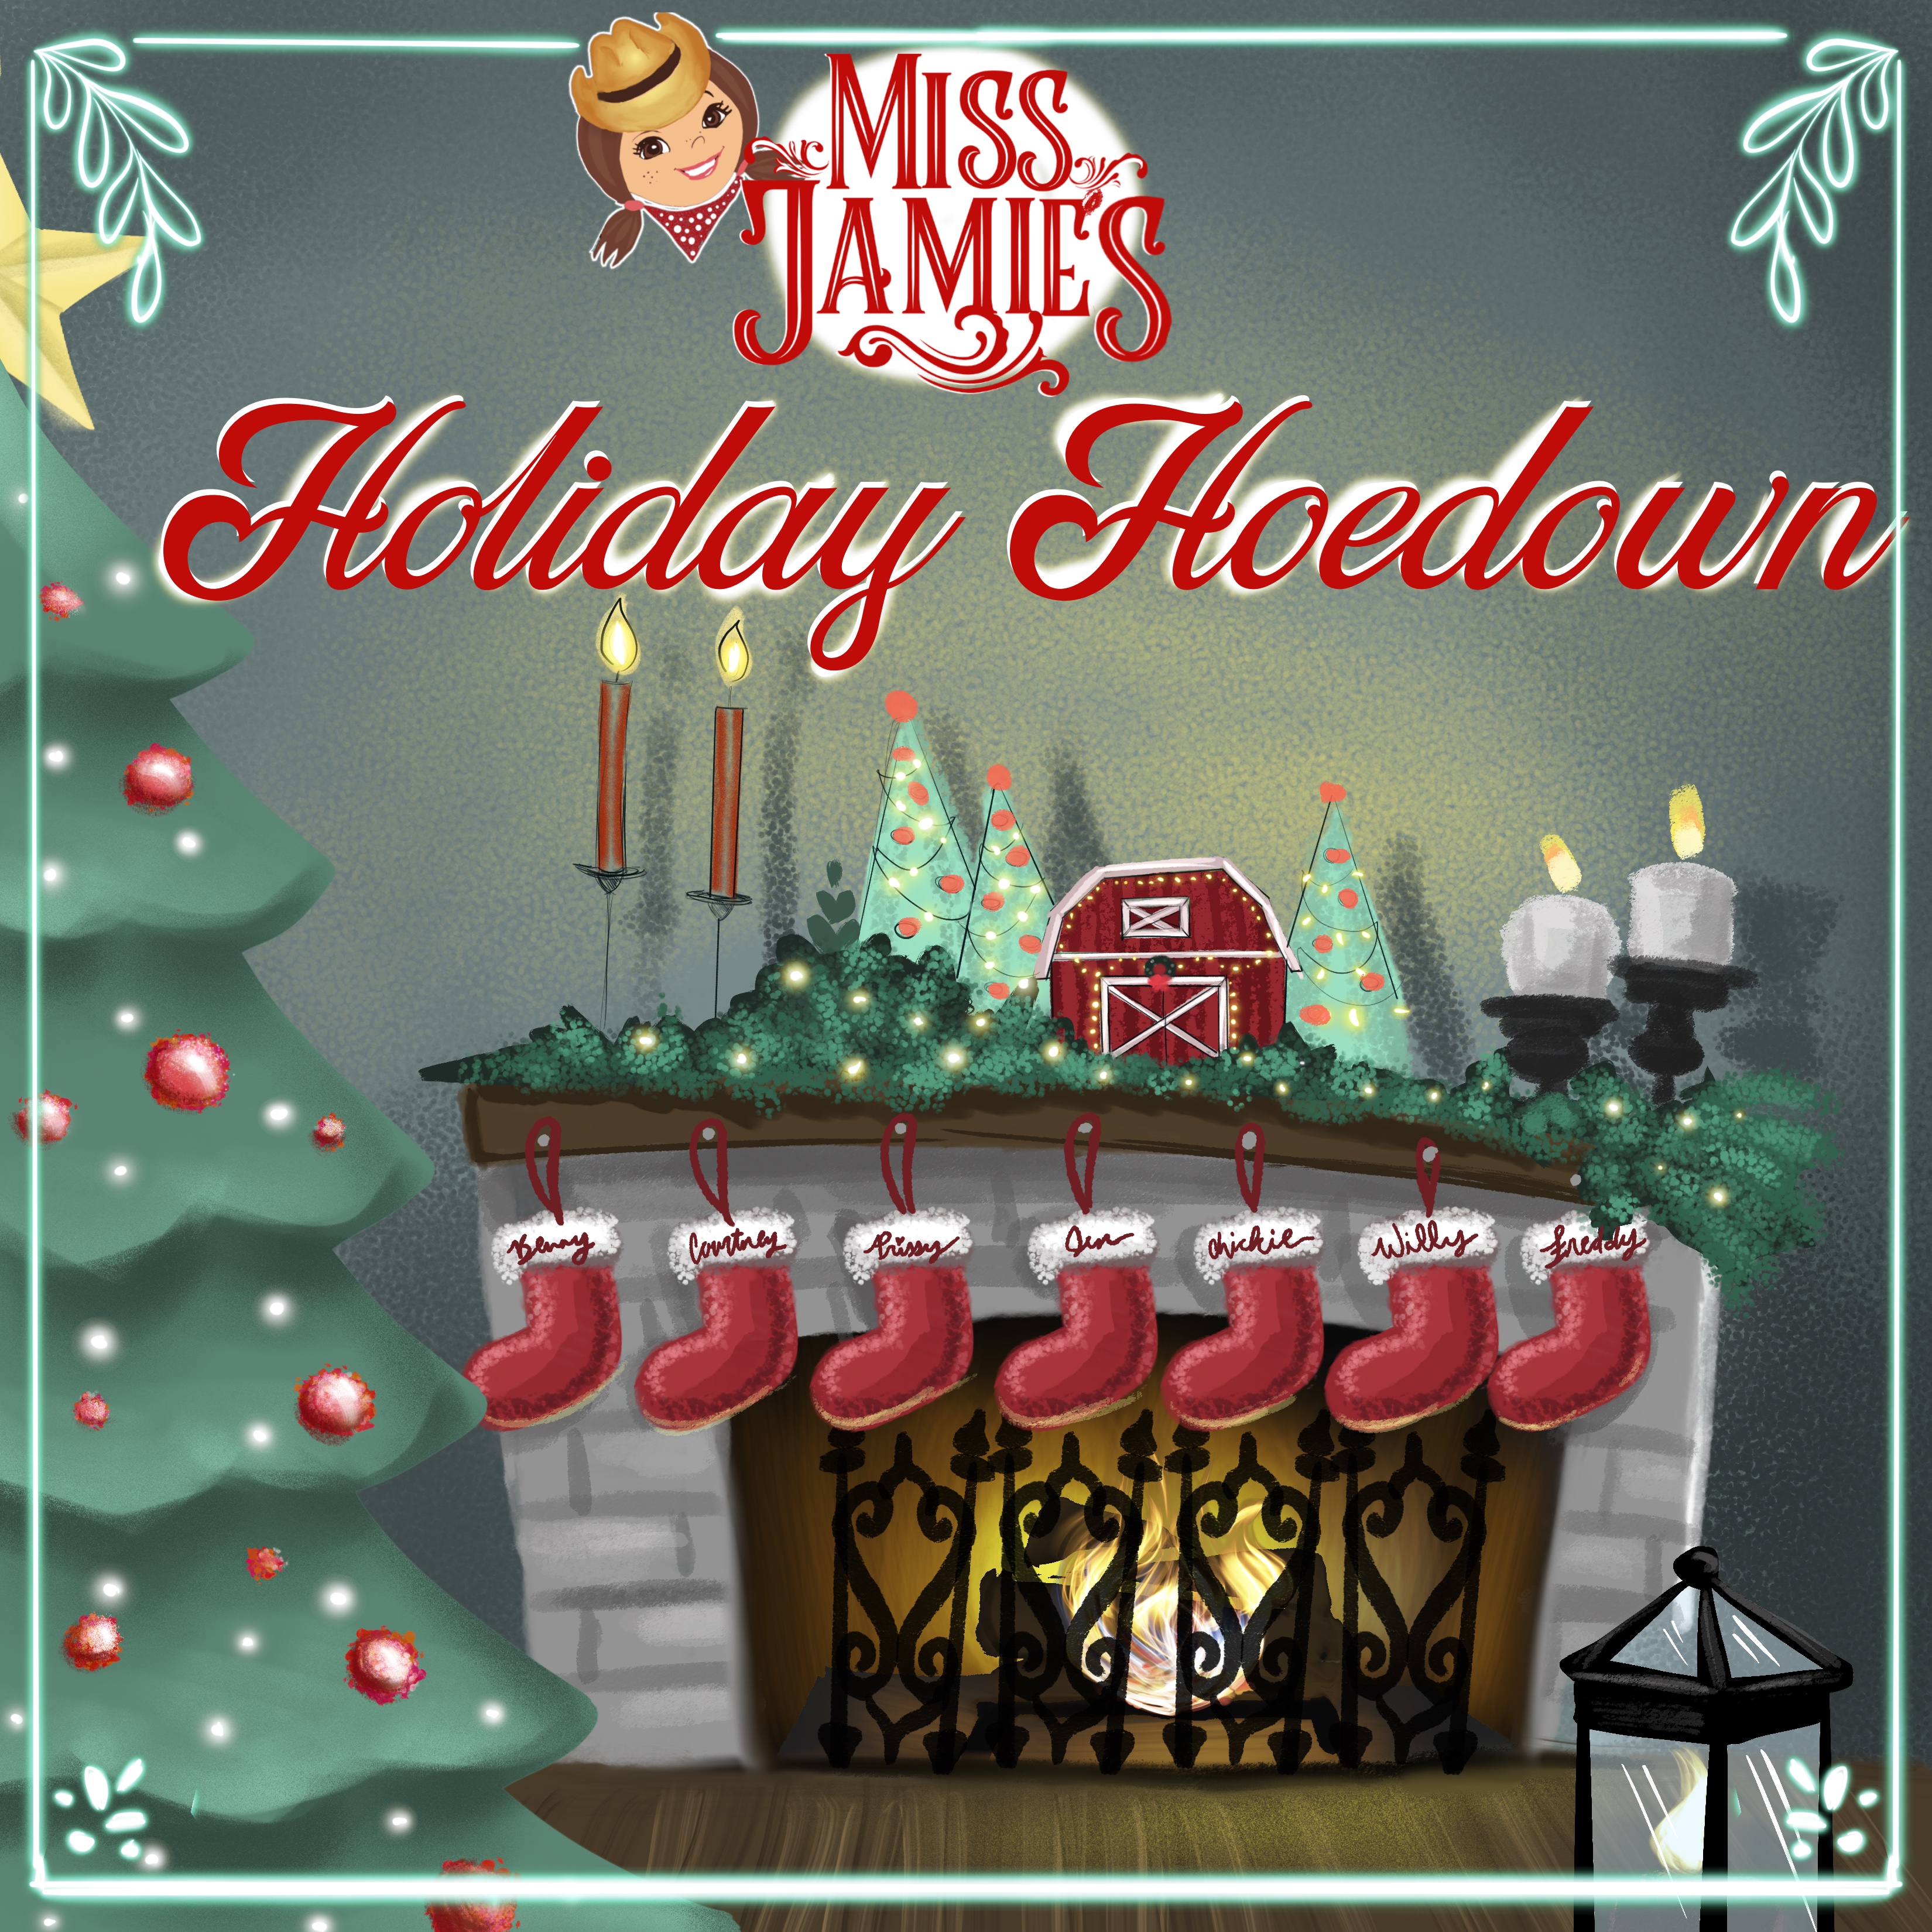 Holiday Hoedown with Miss Jamie image